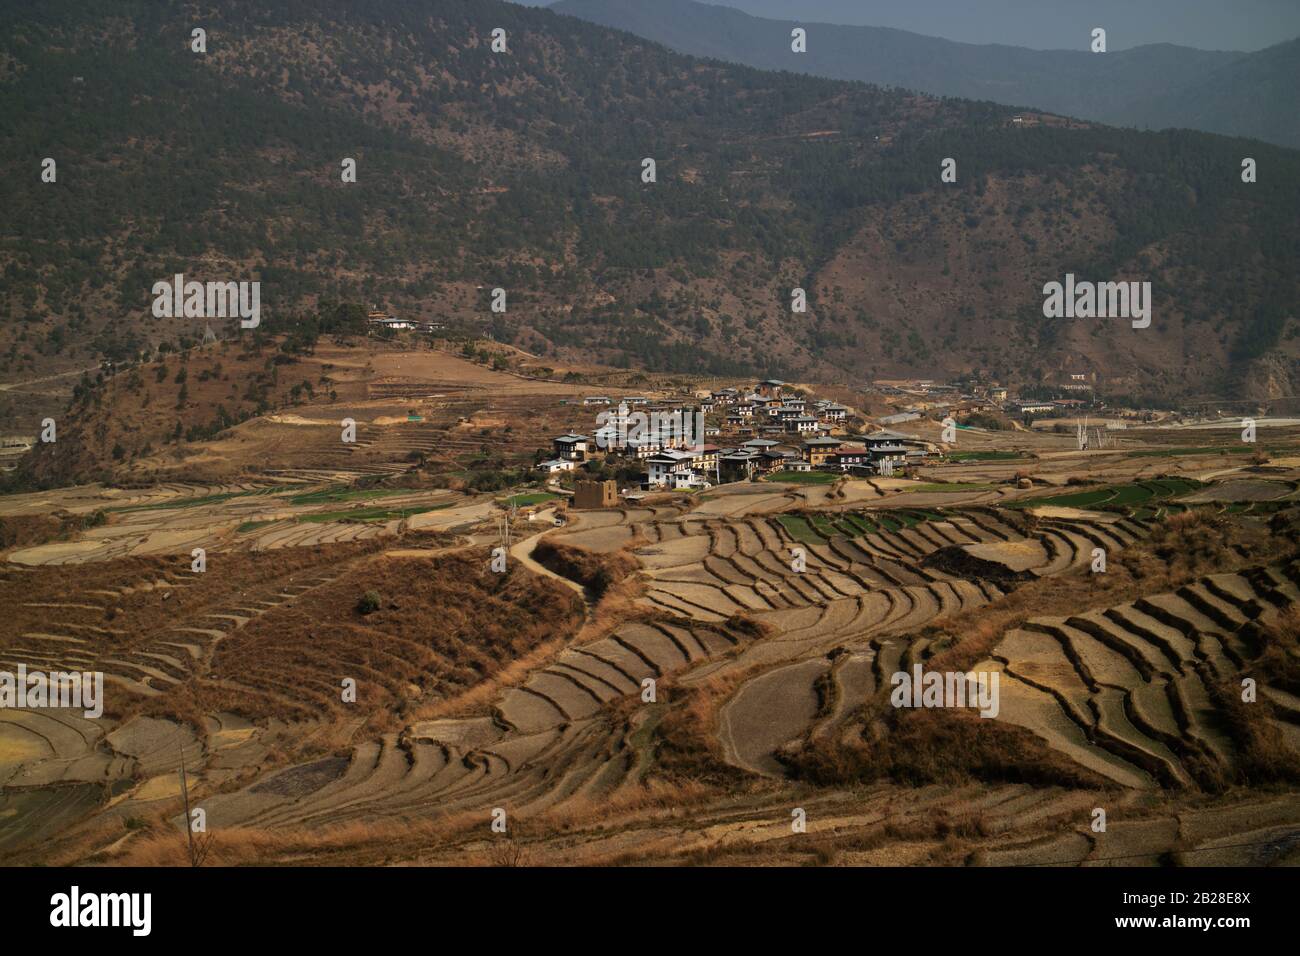 Bhutanese village with Chimi Lhakhang Monastery (fertility monastery) in the background Stock Photo